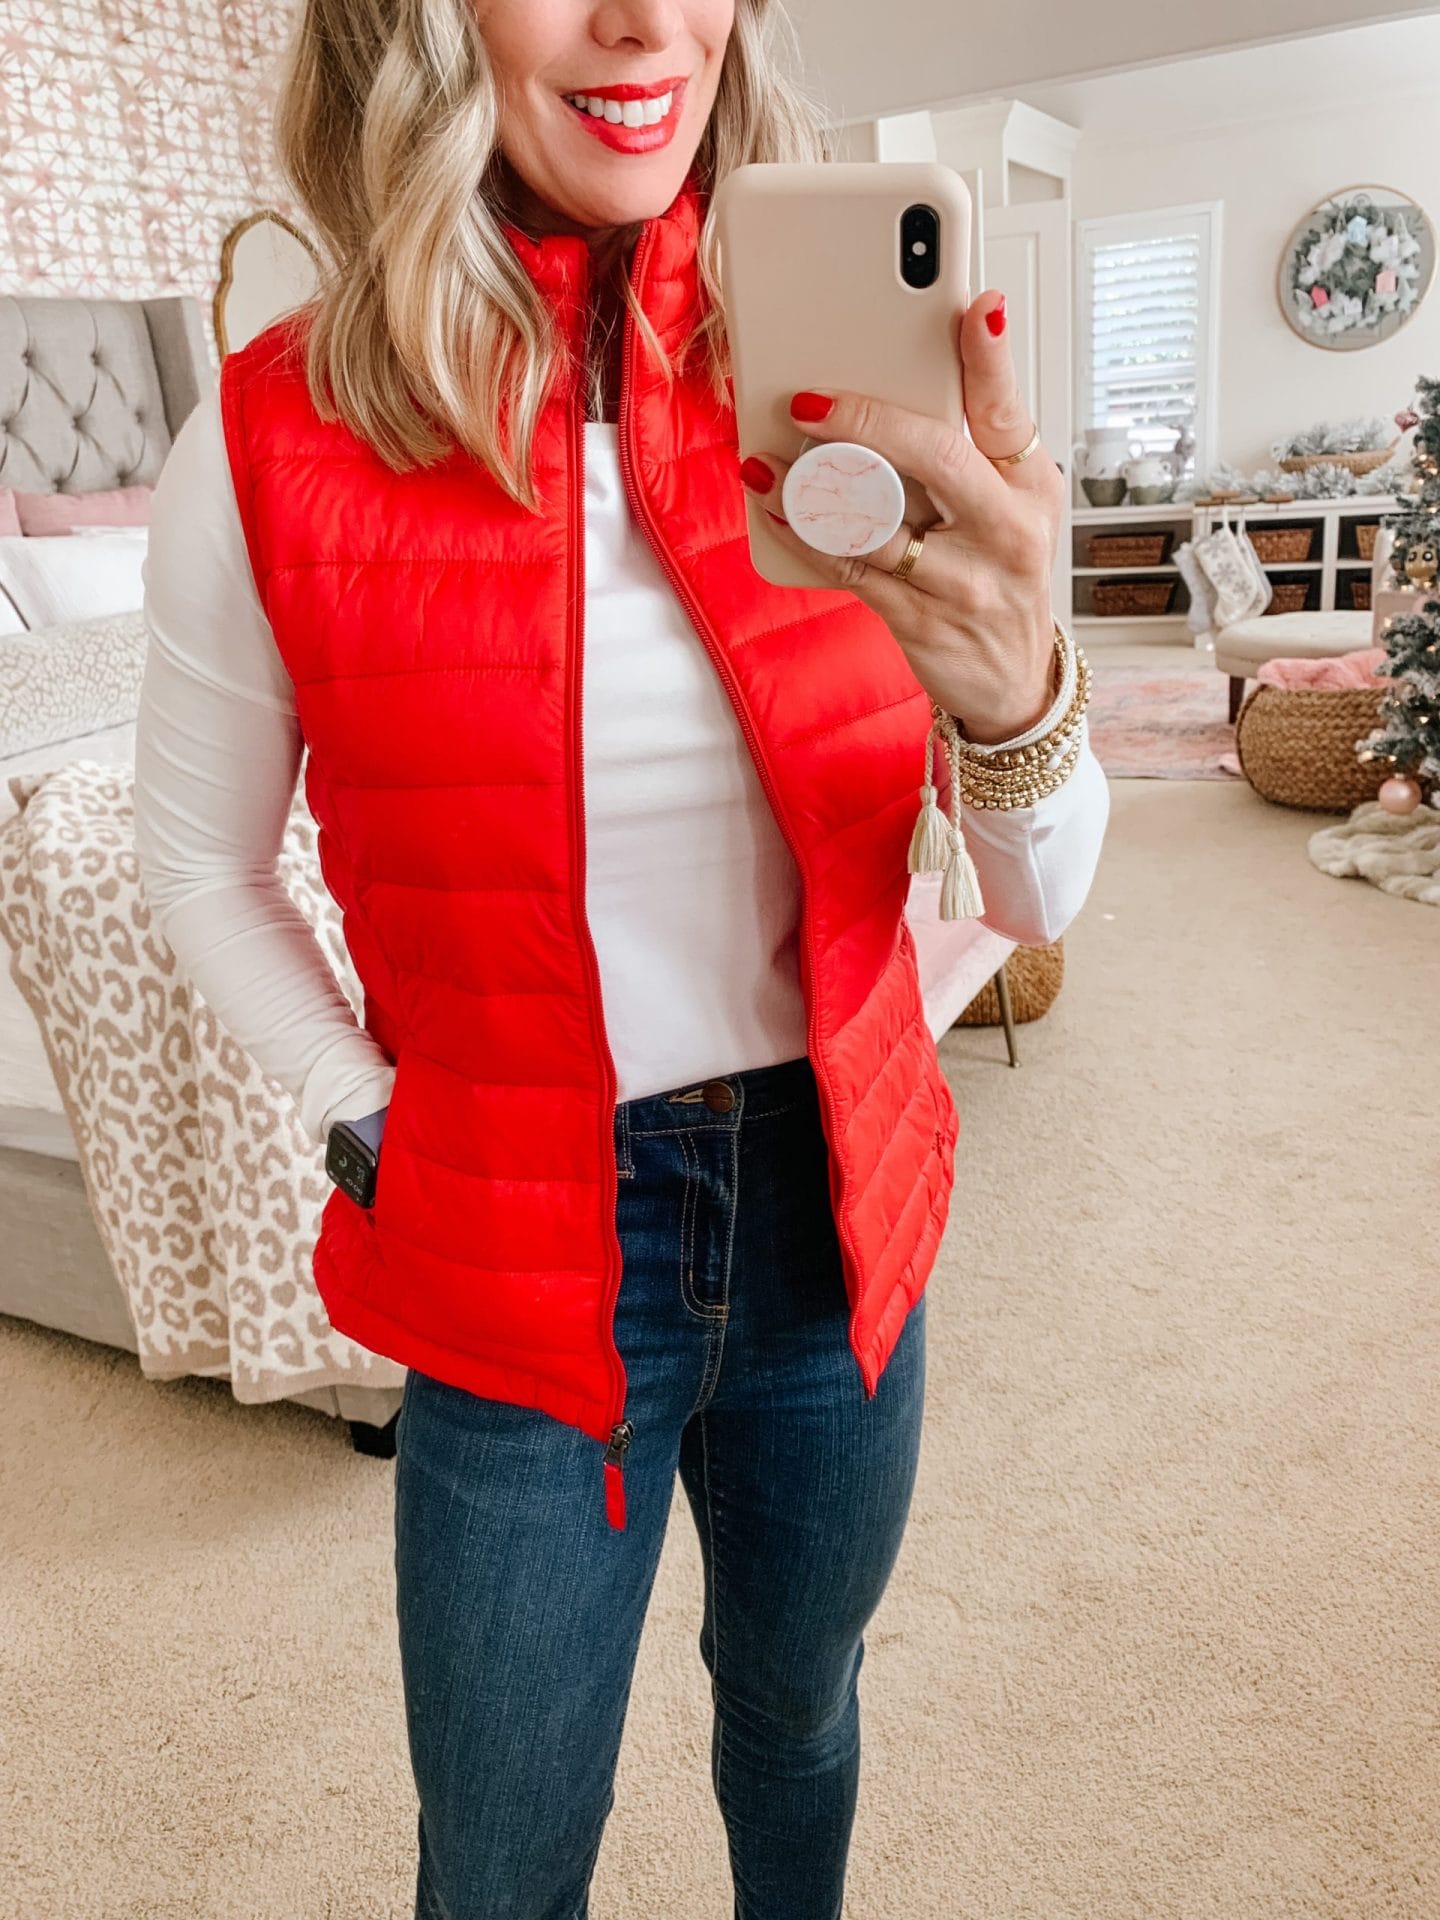 Amazon Fashion, Tee, Puffer Vest, Jeans, Booties 